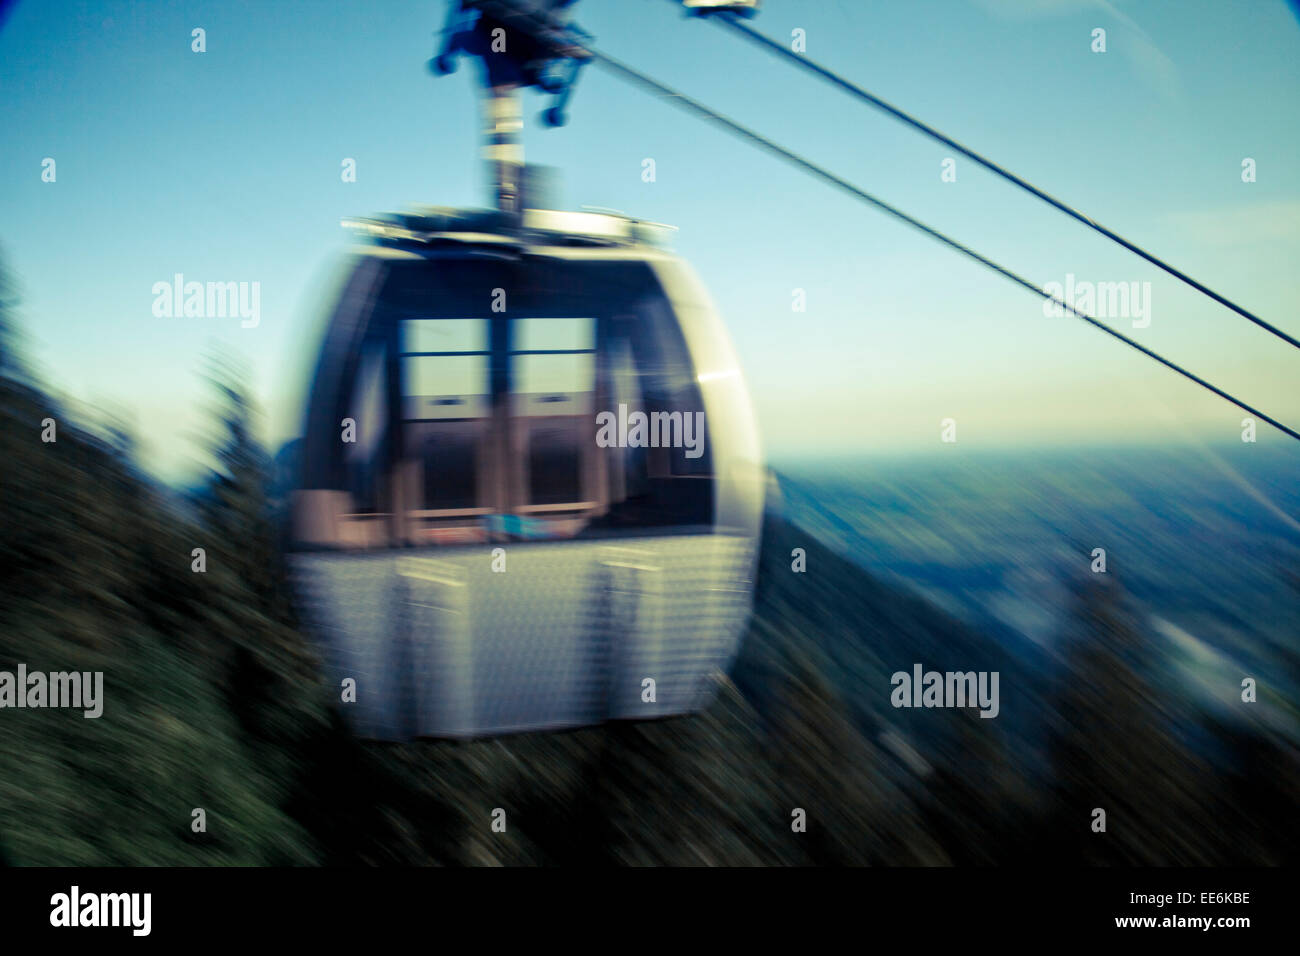 Cable car on the move, Bavaria, Germany Stock Photo